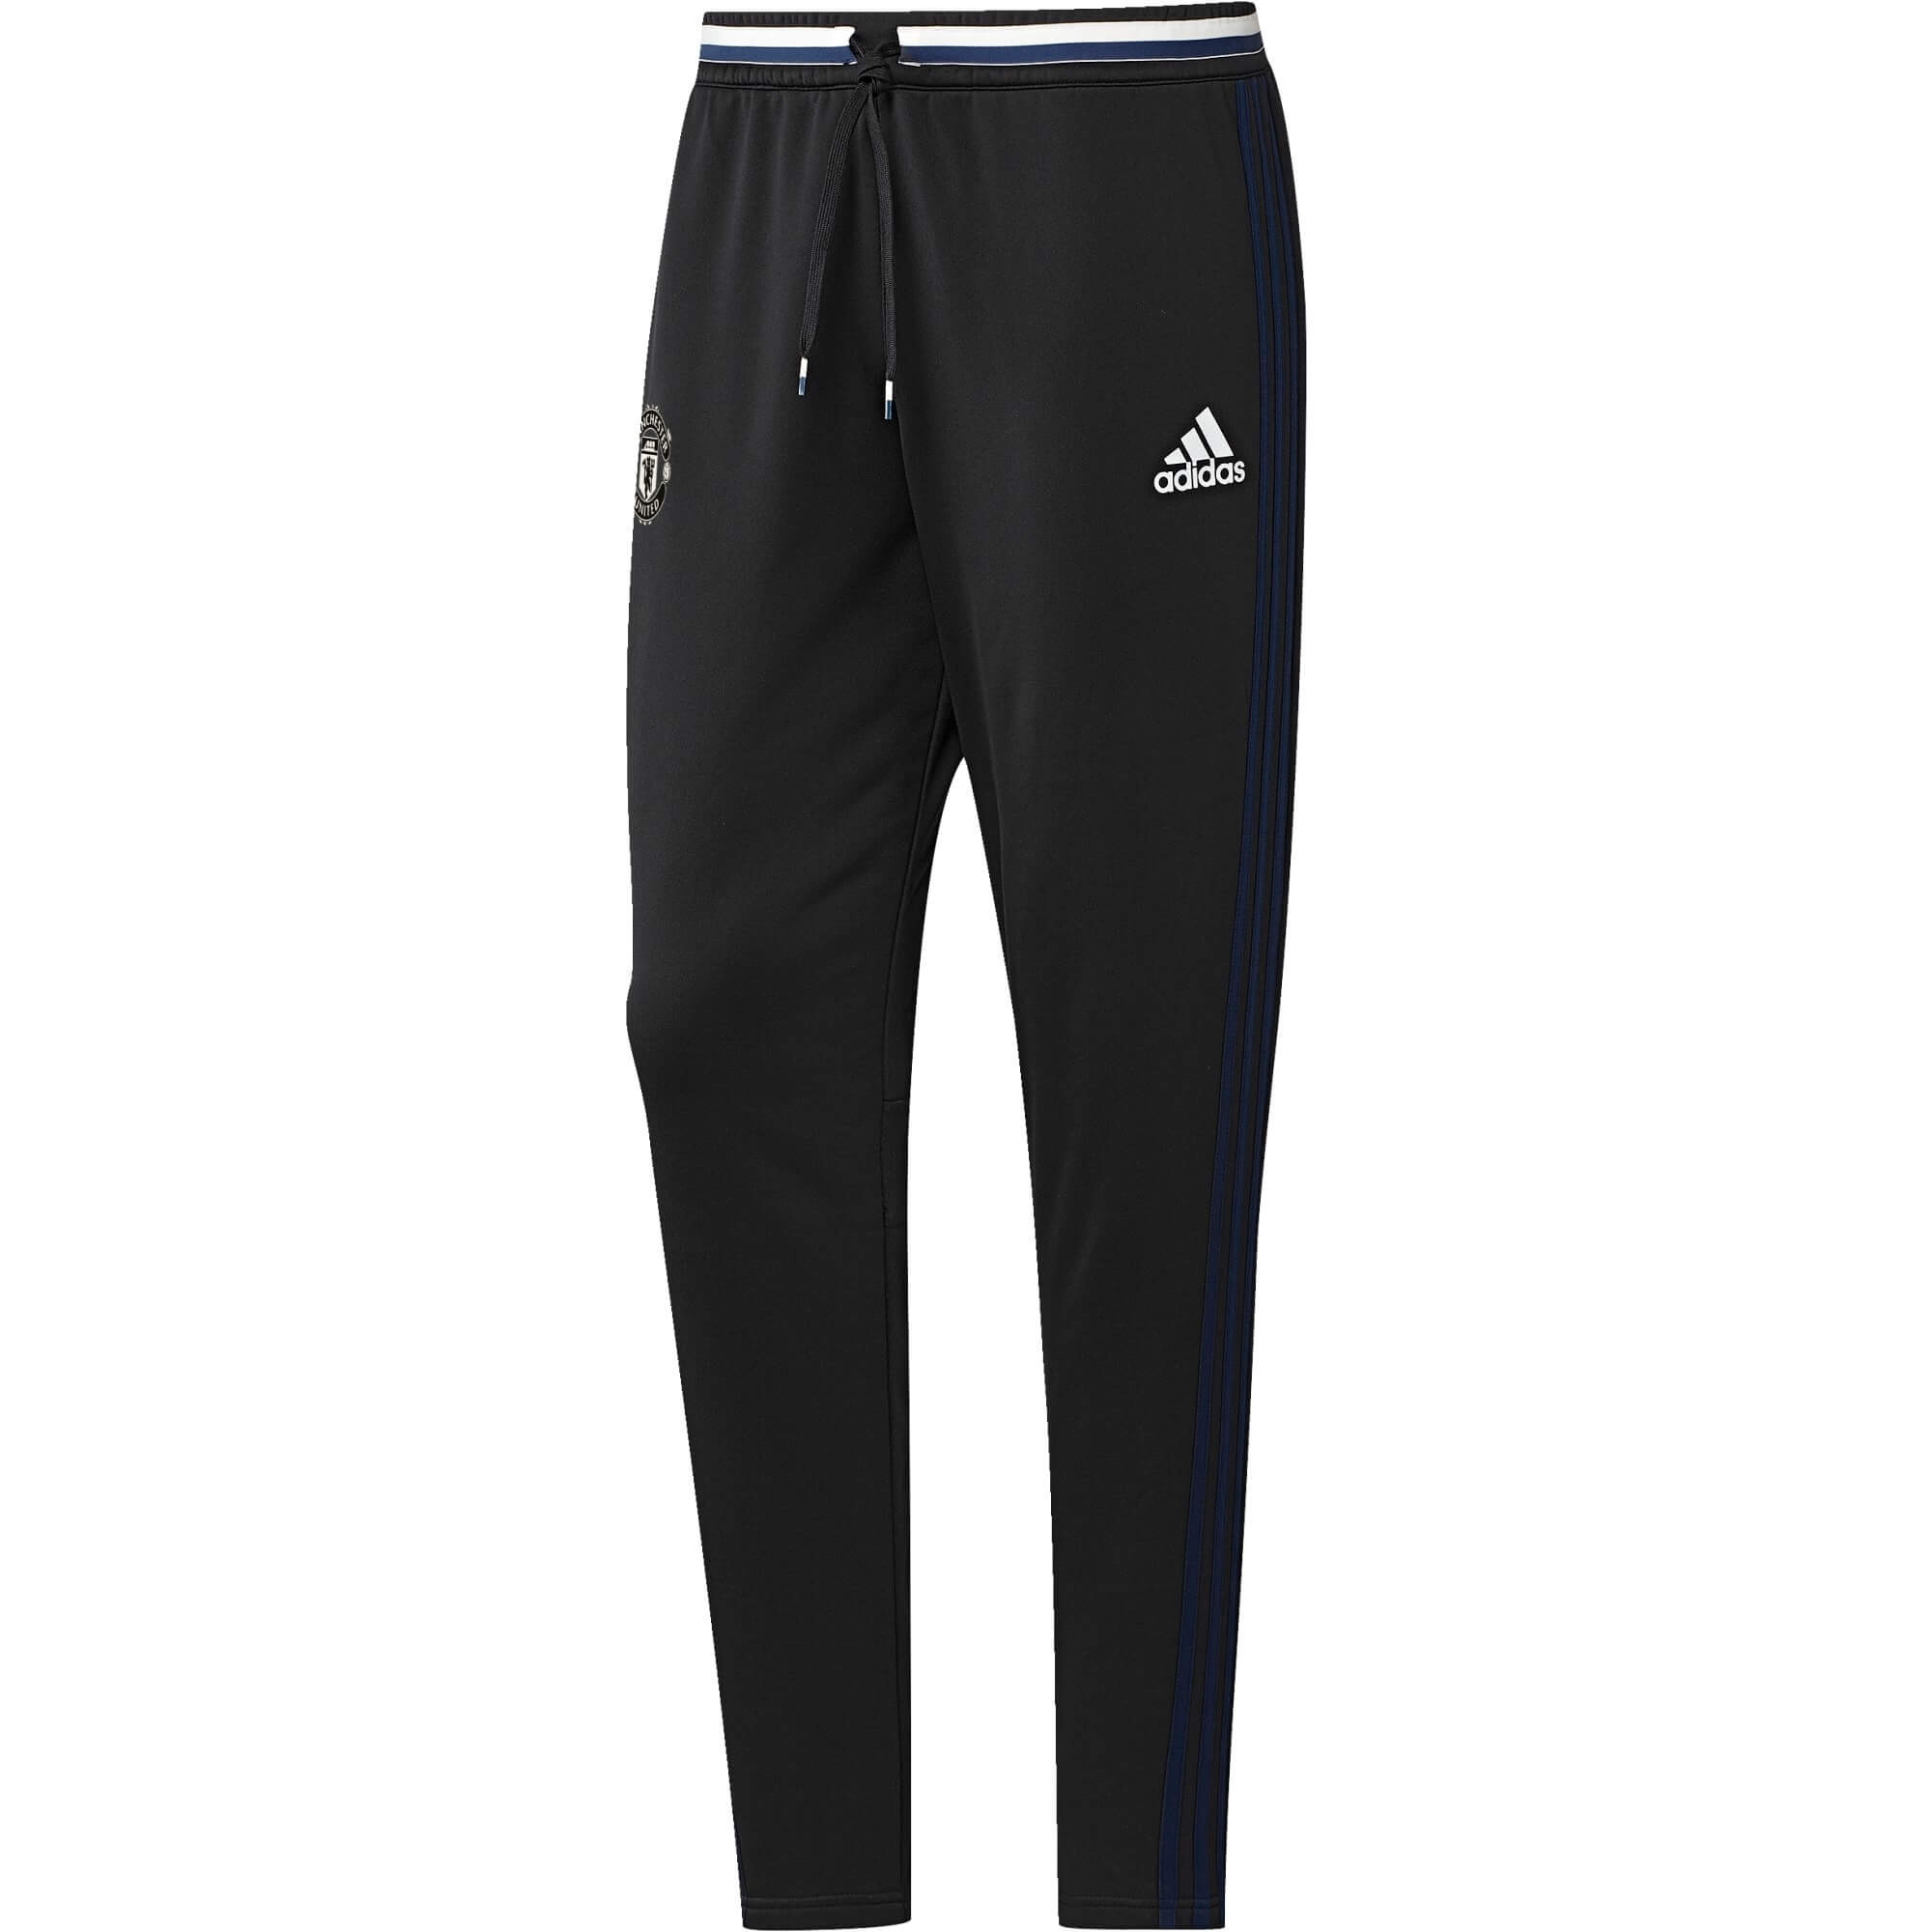 ADIDAS MANCHESTER UNITED TRG PANT NOIR 2016/2017